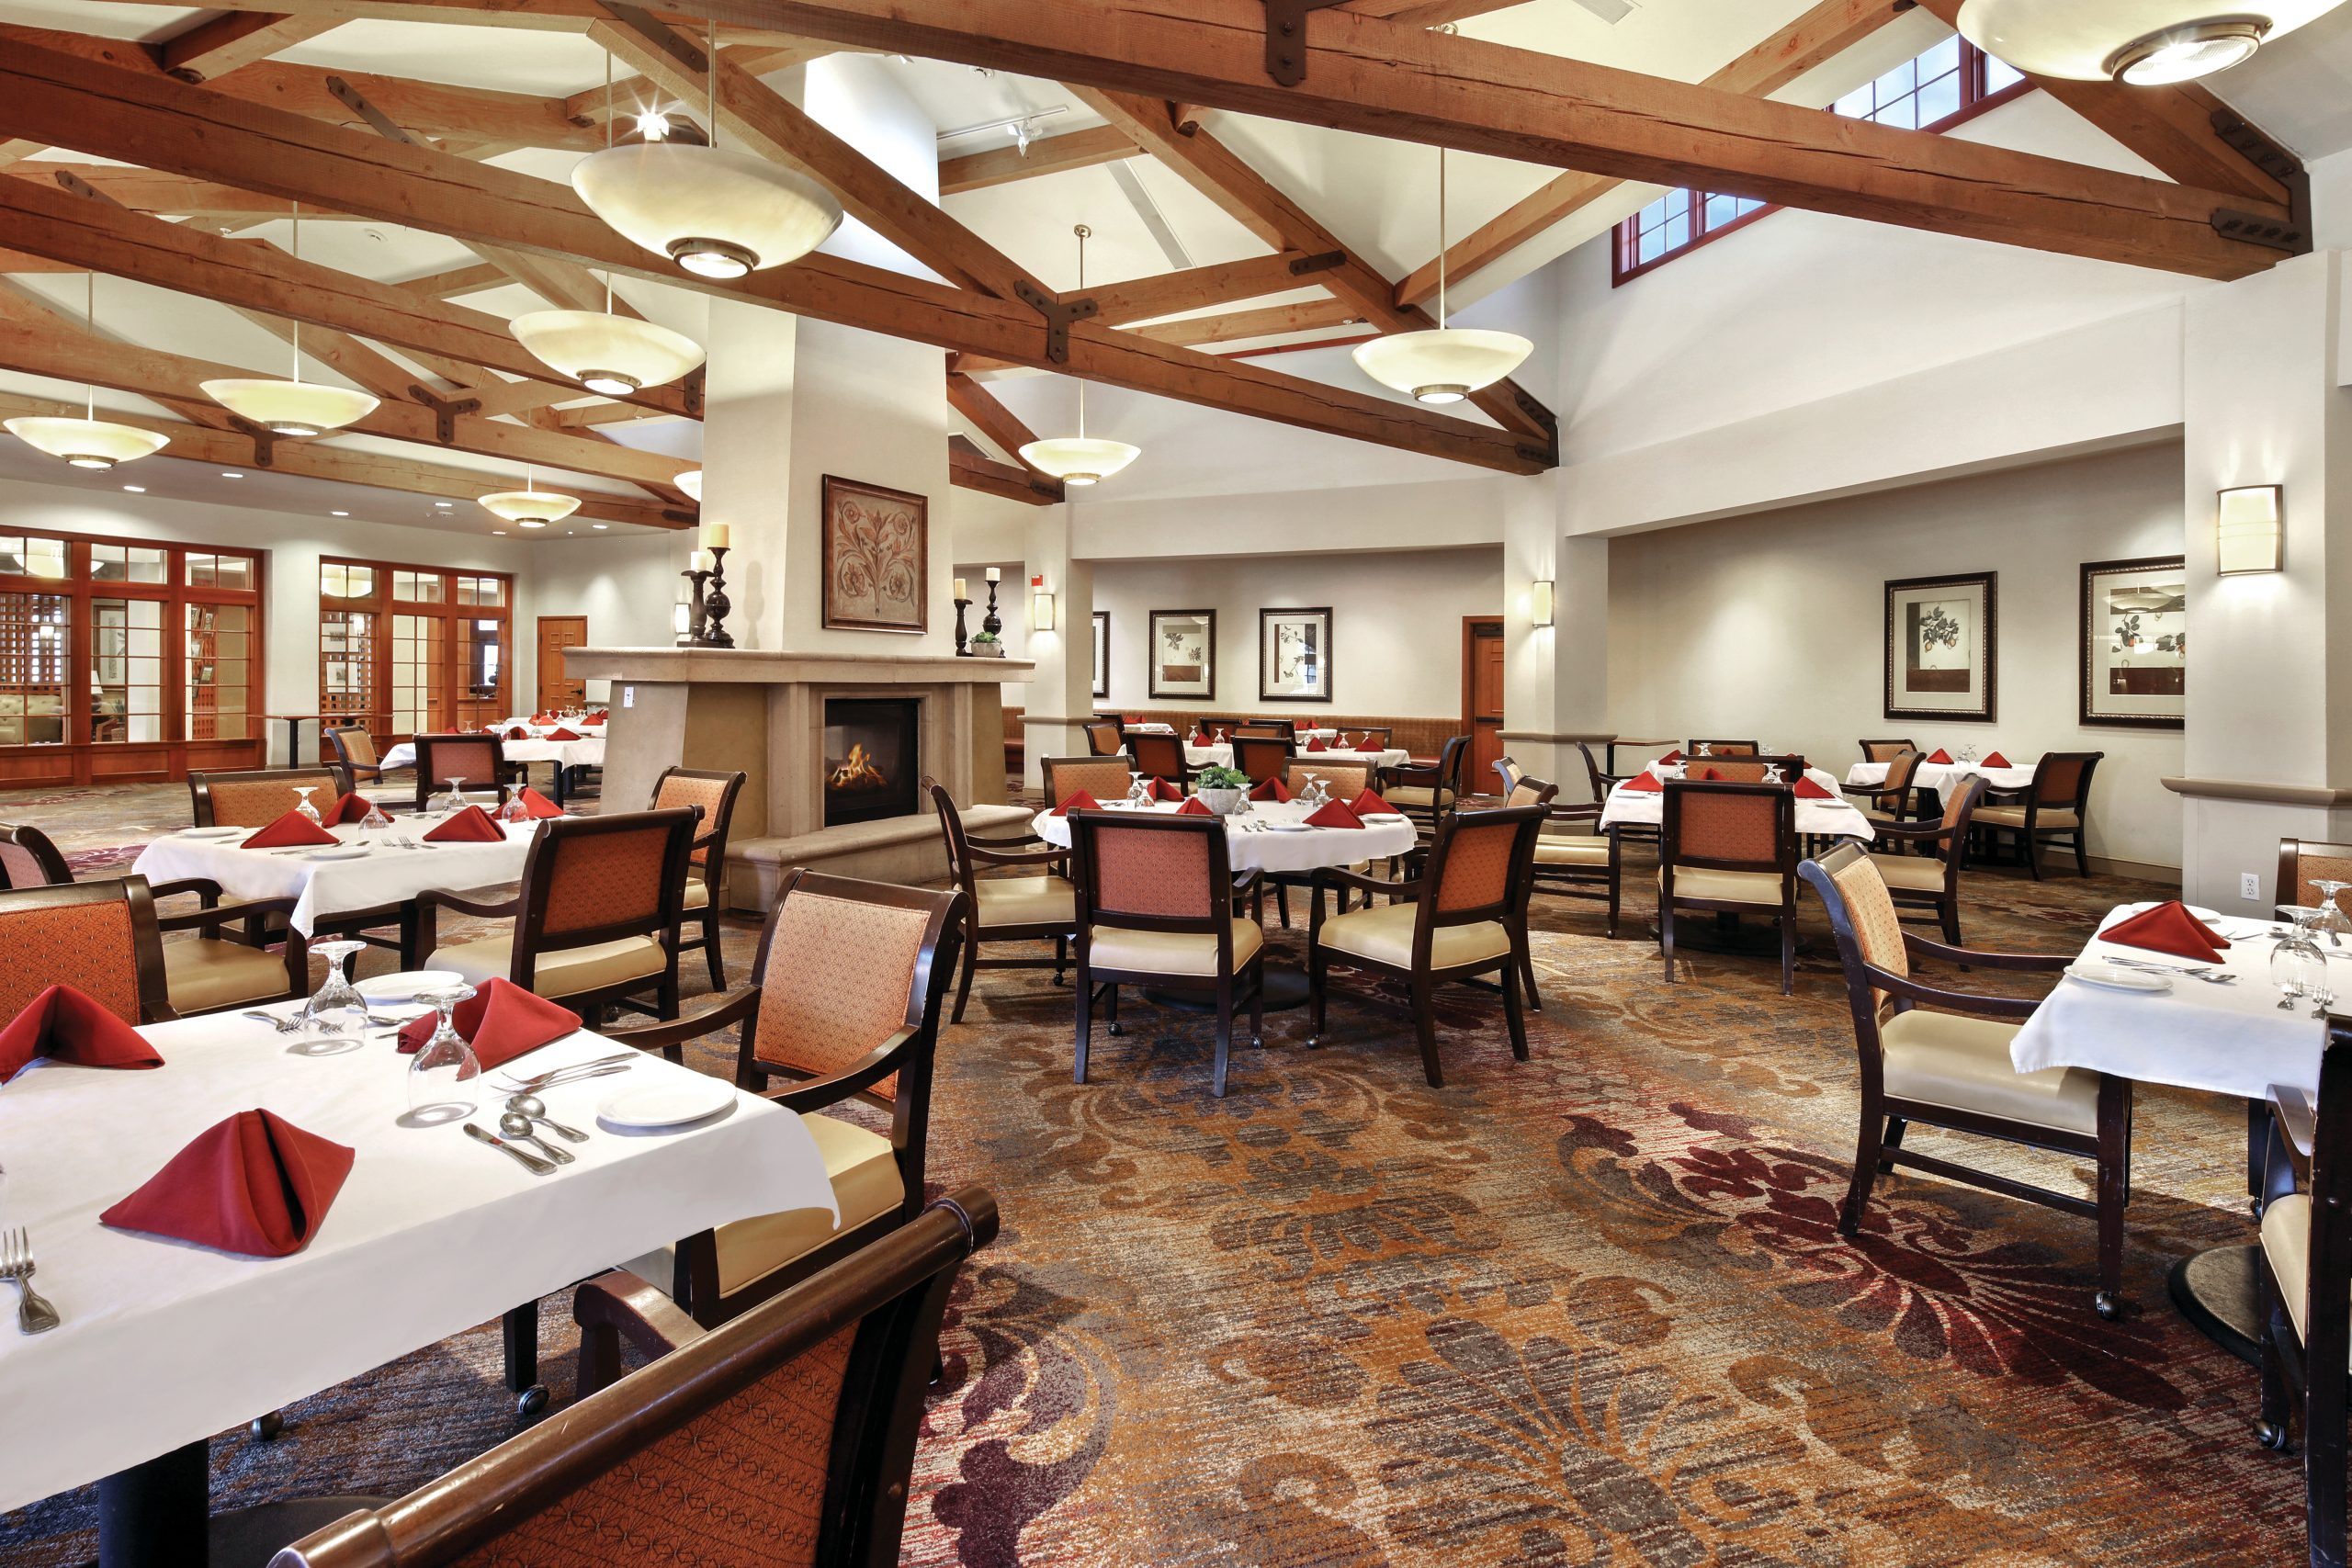 A spacious dining room with neatly arranged tables and chairs for a comfortable dining experience.